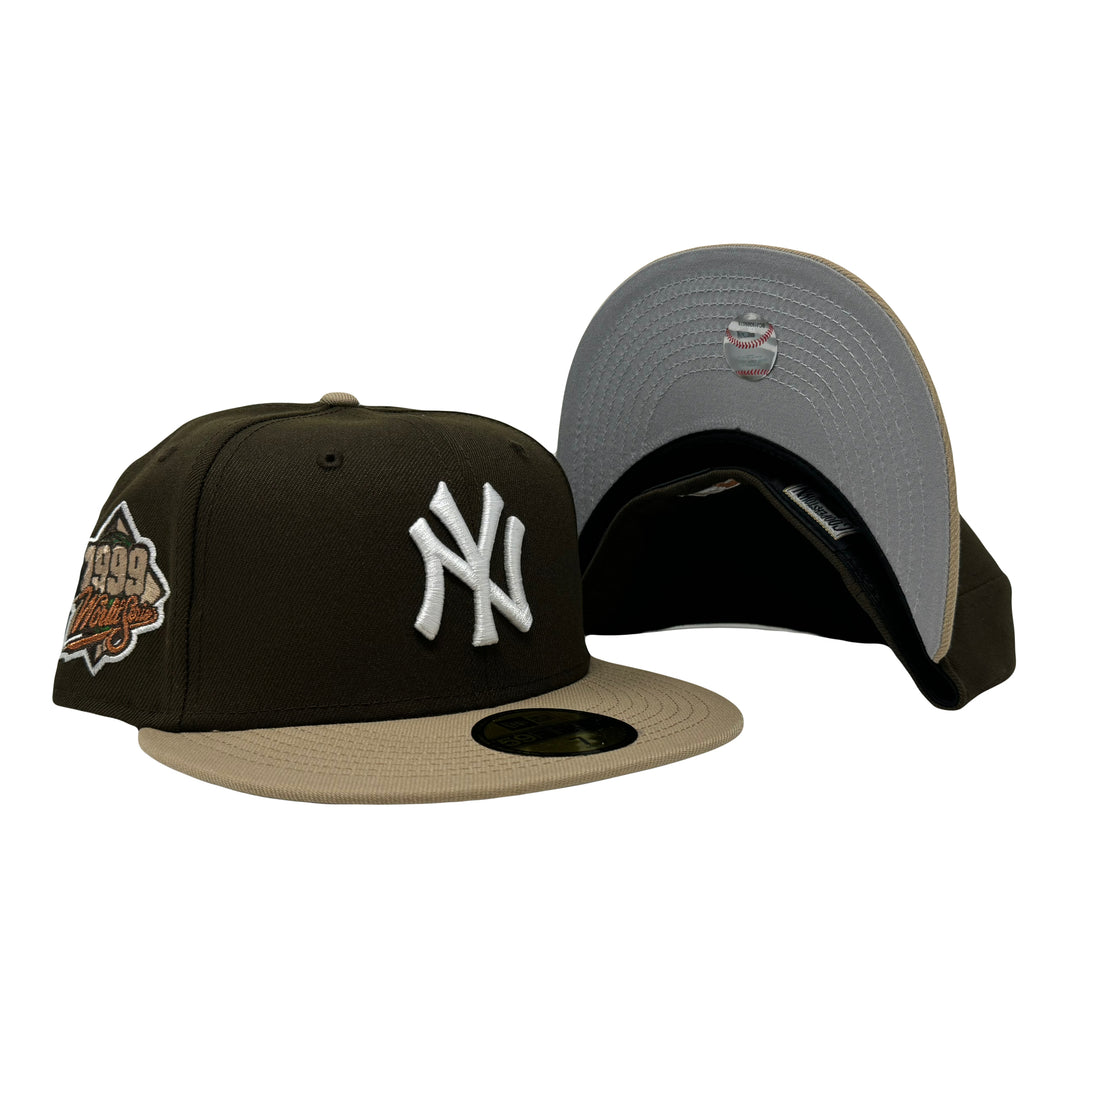 New York Yankees 1999 World Series Mocha Color 5950 New Era Fitted Hat